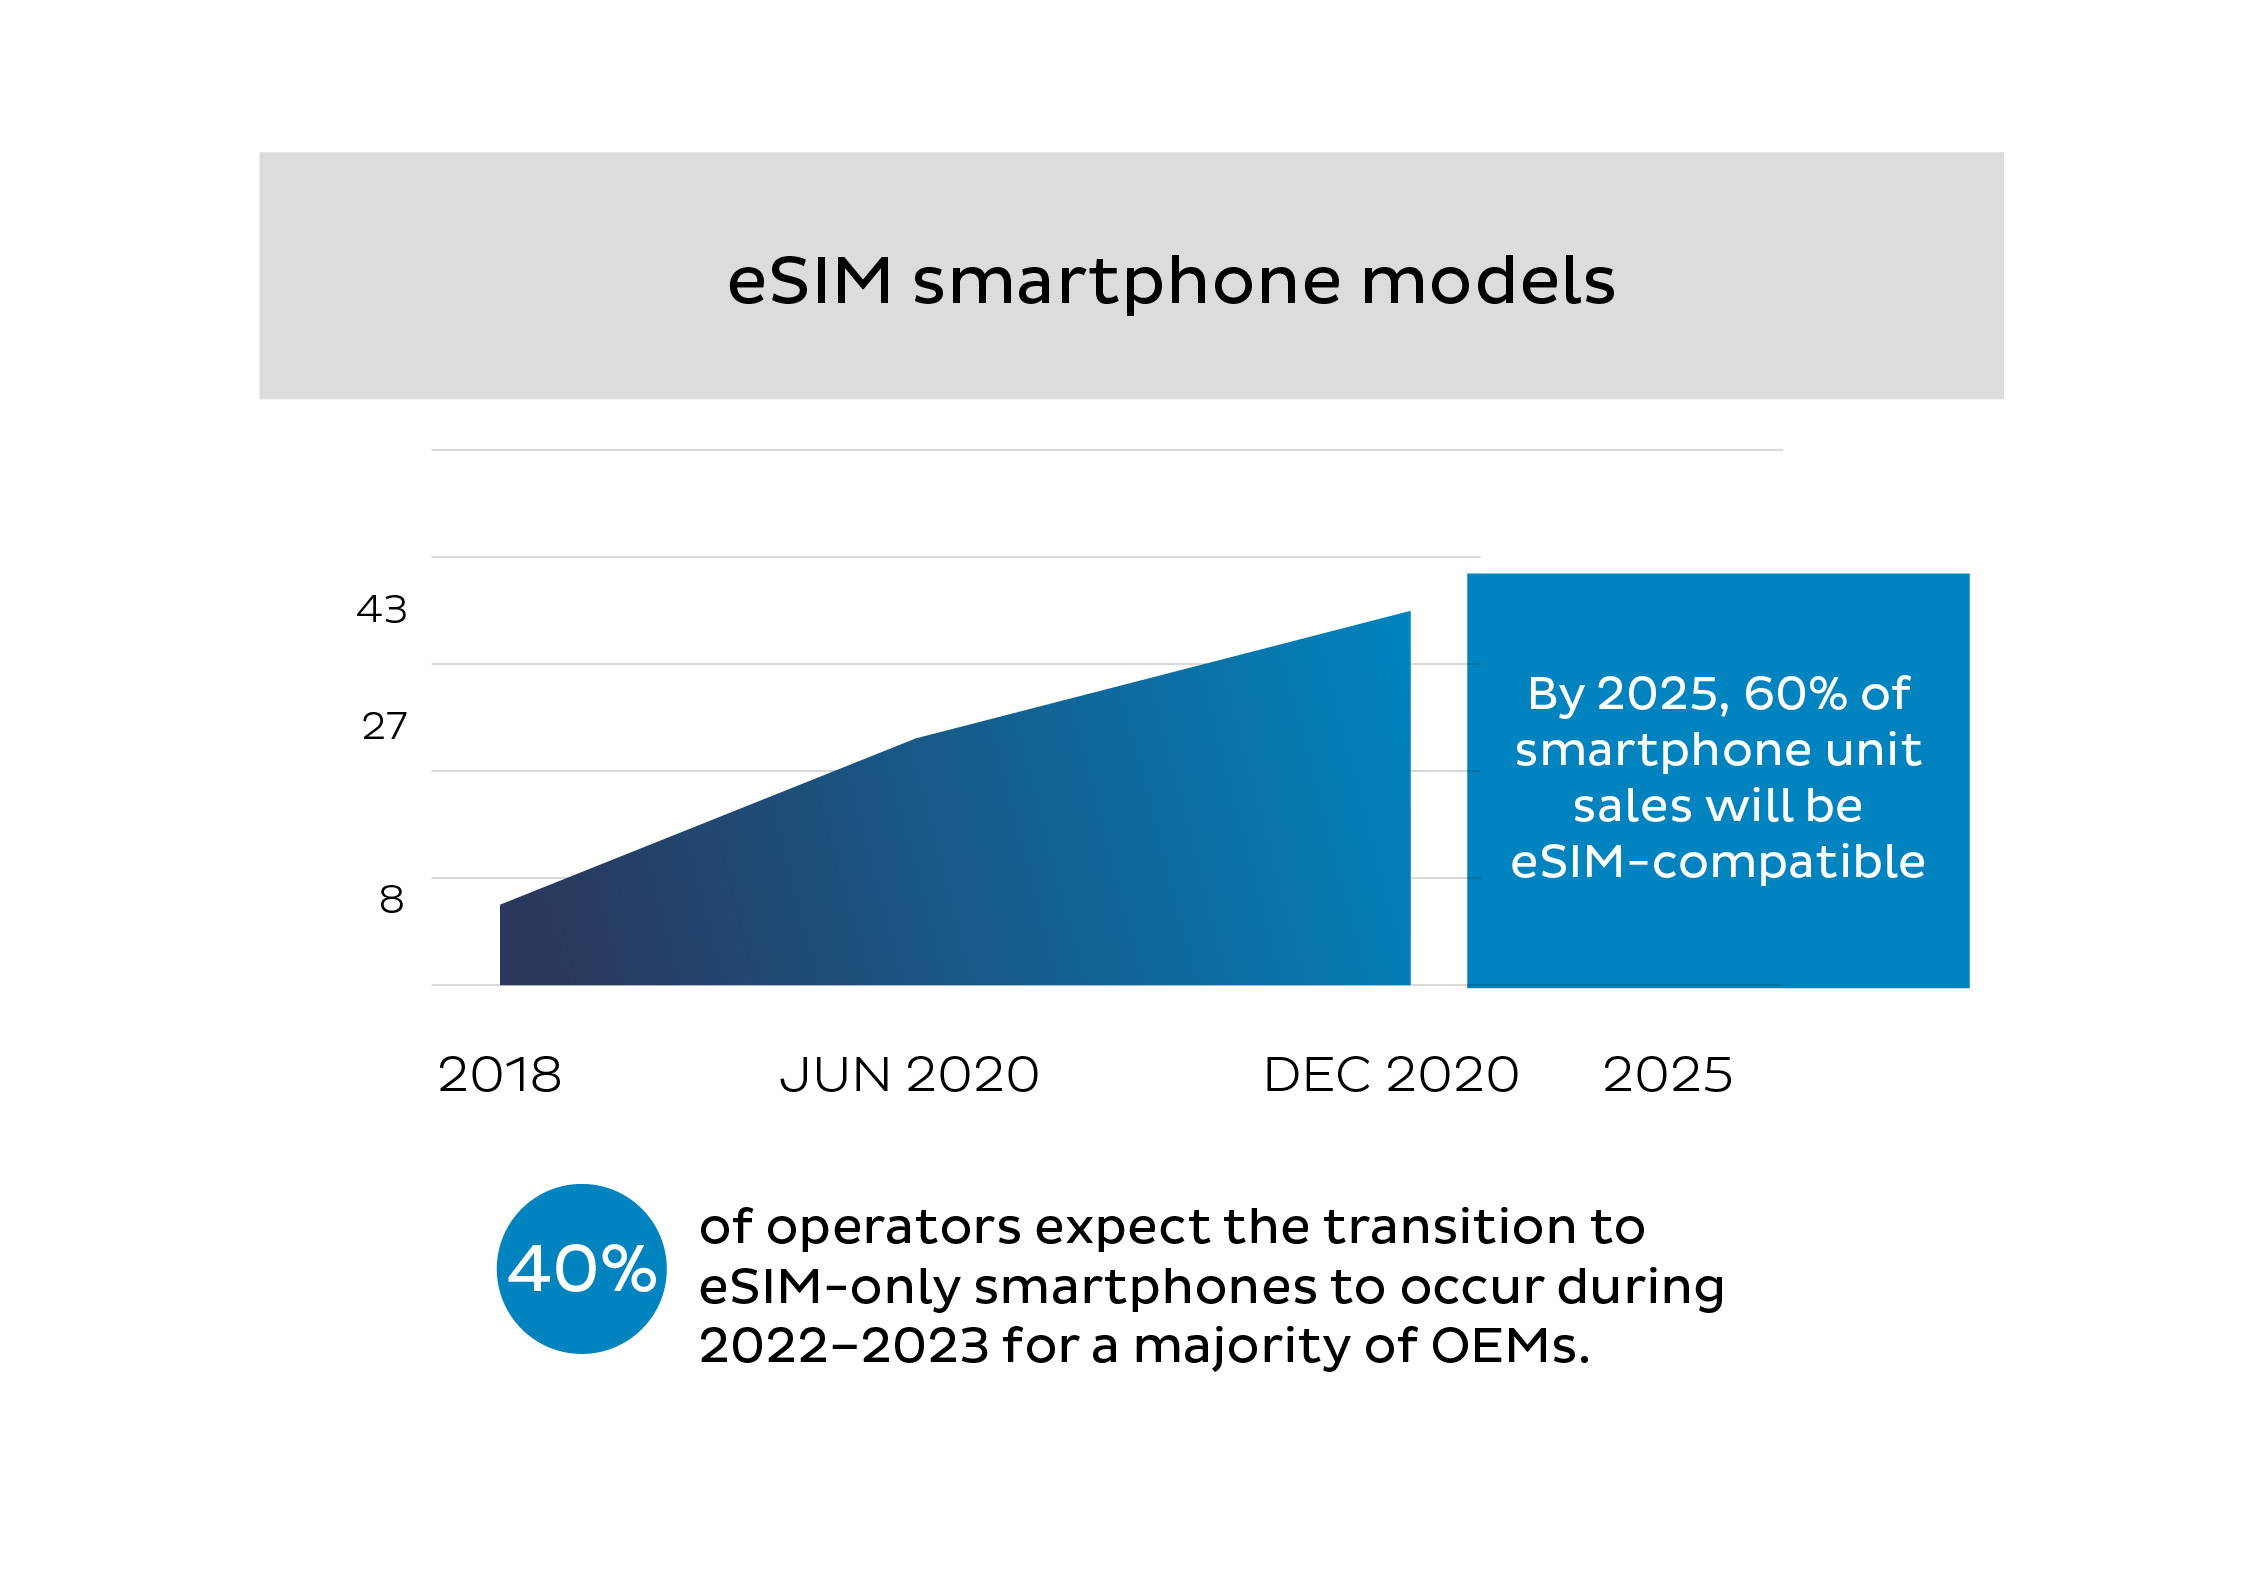 By 2025, 60% of smartphone unit sales will be eSIM-compatible